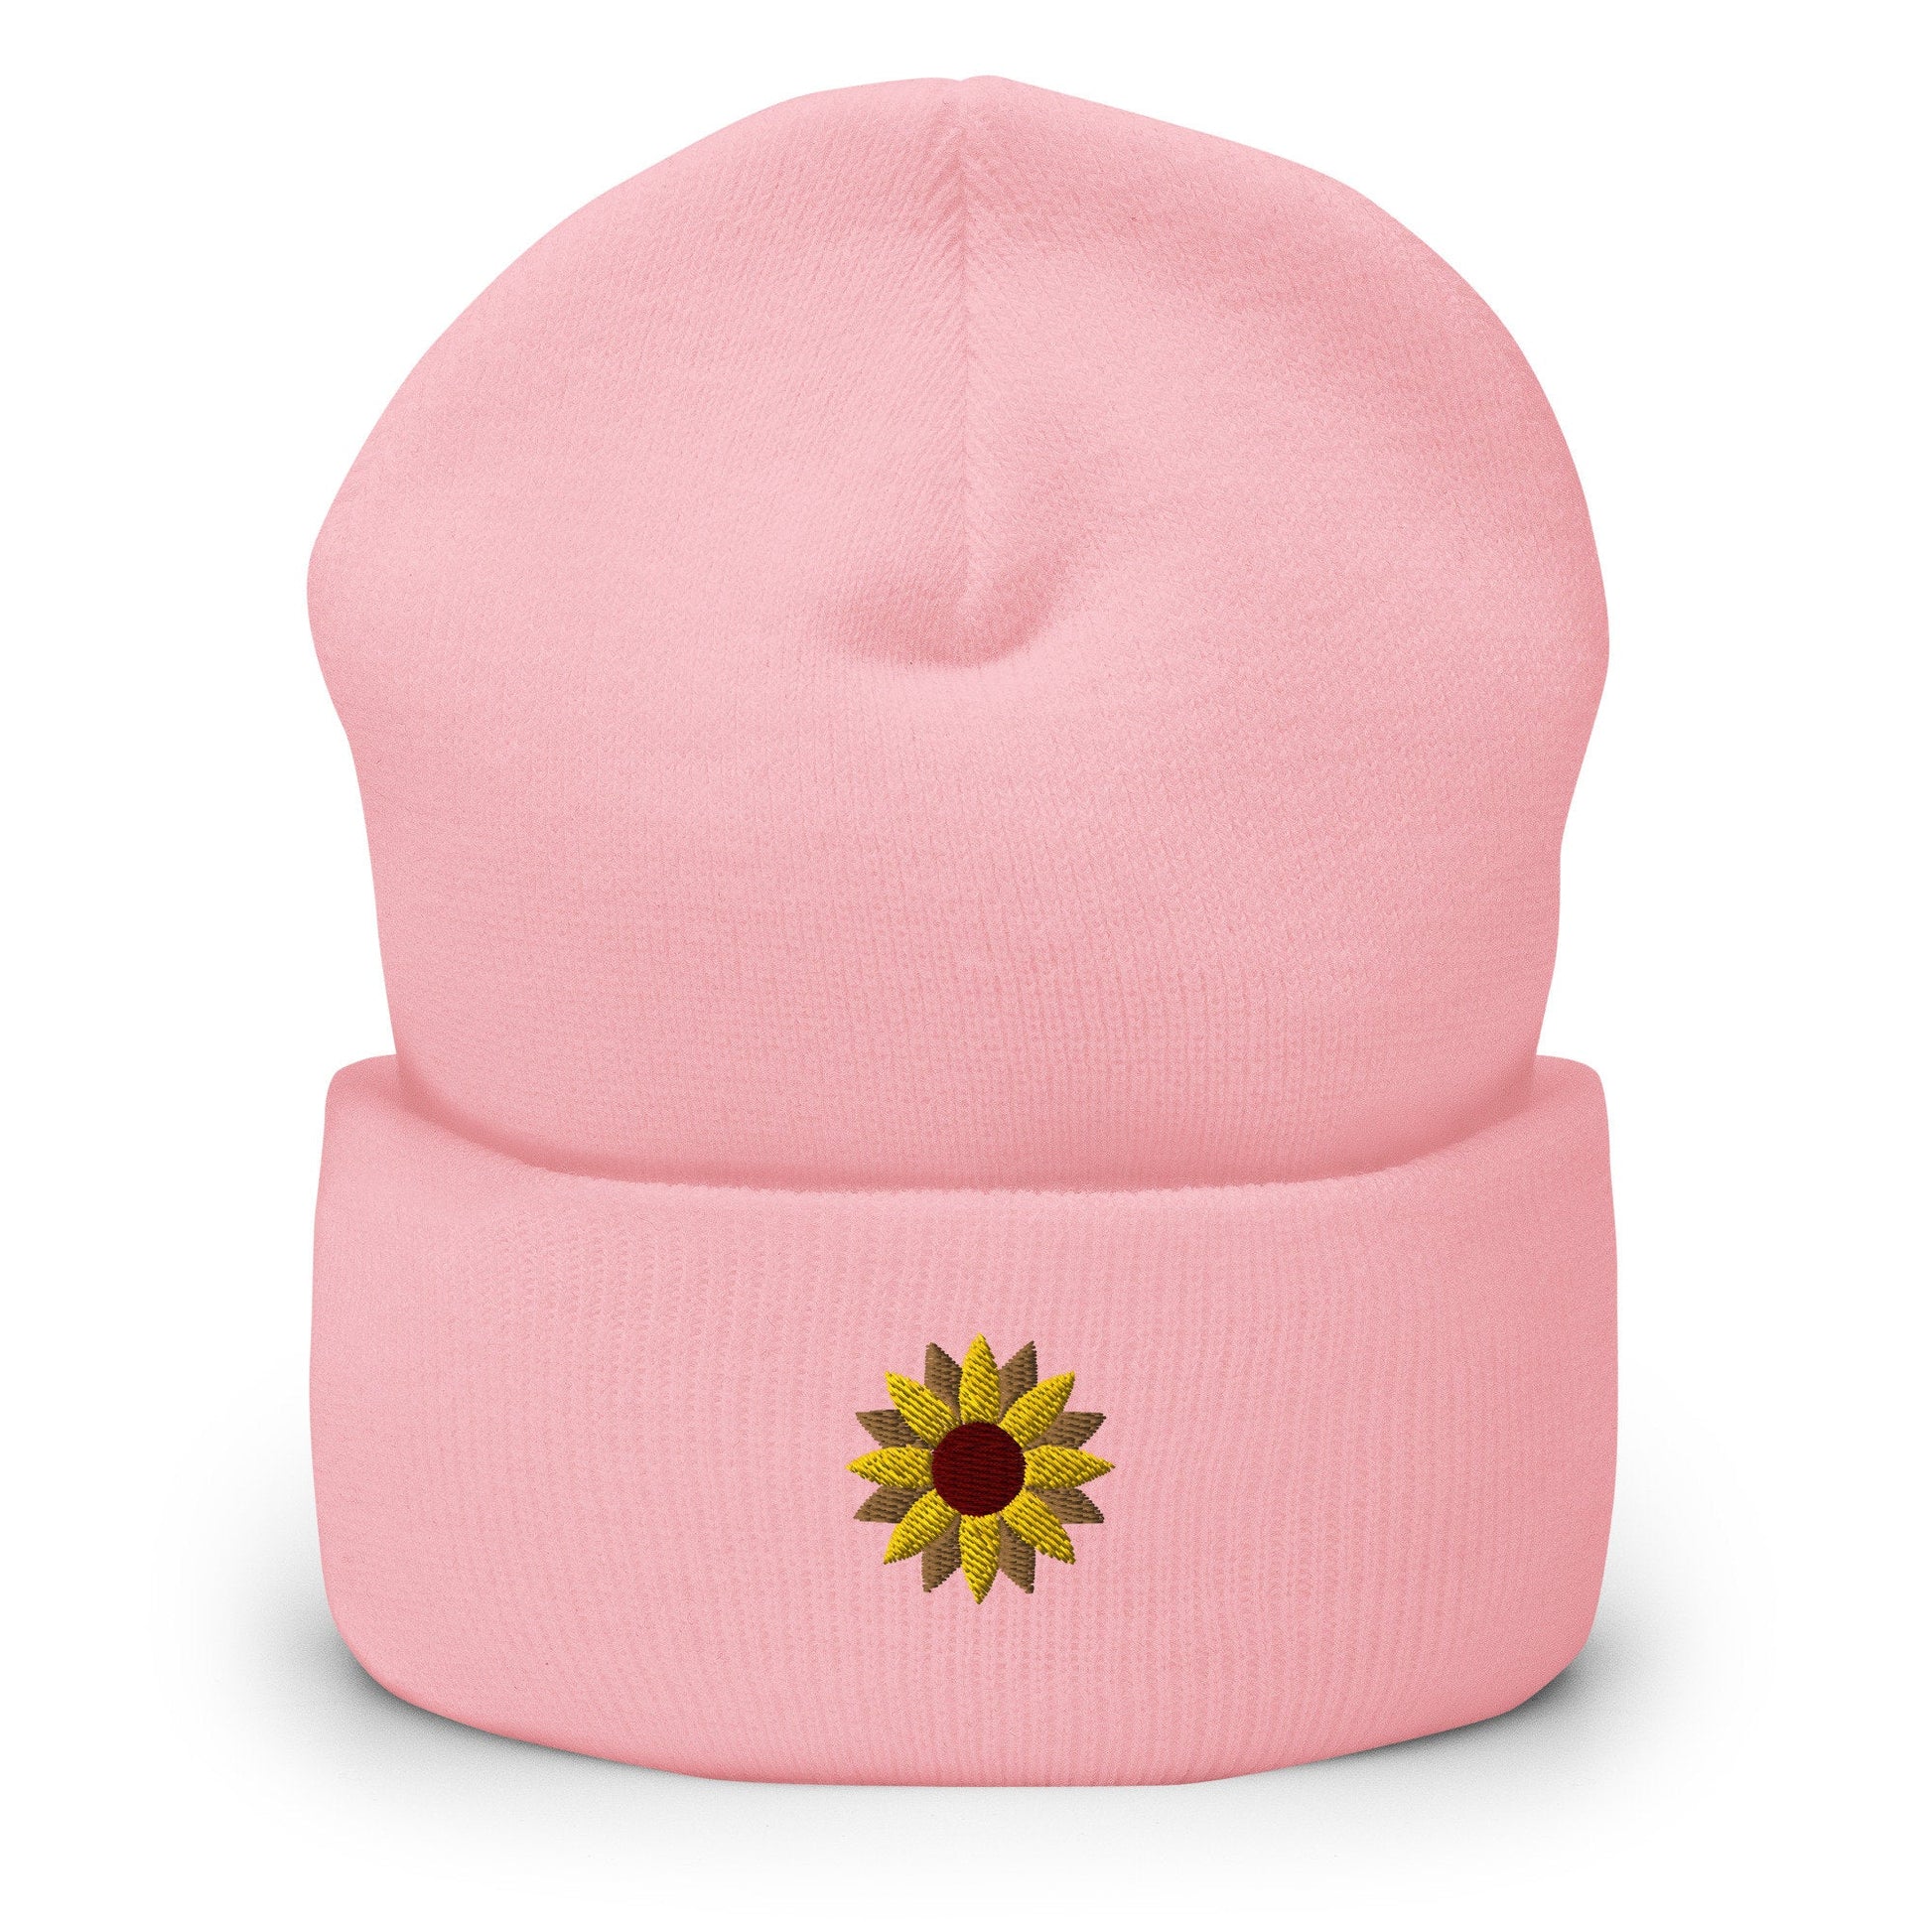 Sunflower Beanie - Fall, Autumn, Thanksgiving Hat - Embroidered + Cuffed + Hypoallergenic - Multiple Colors - Evilwater Originals